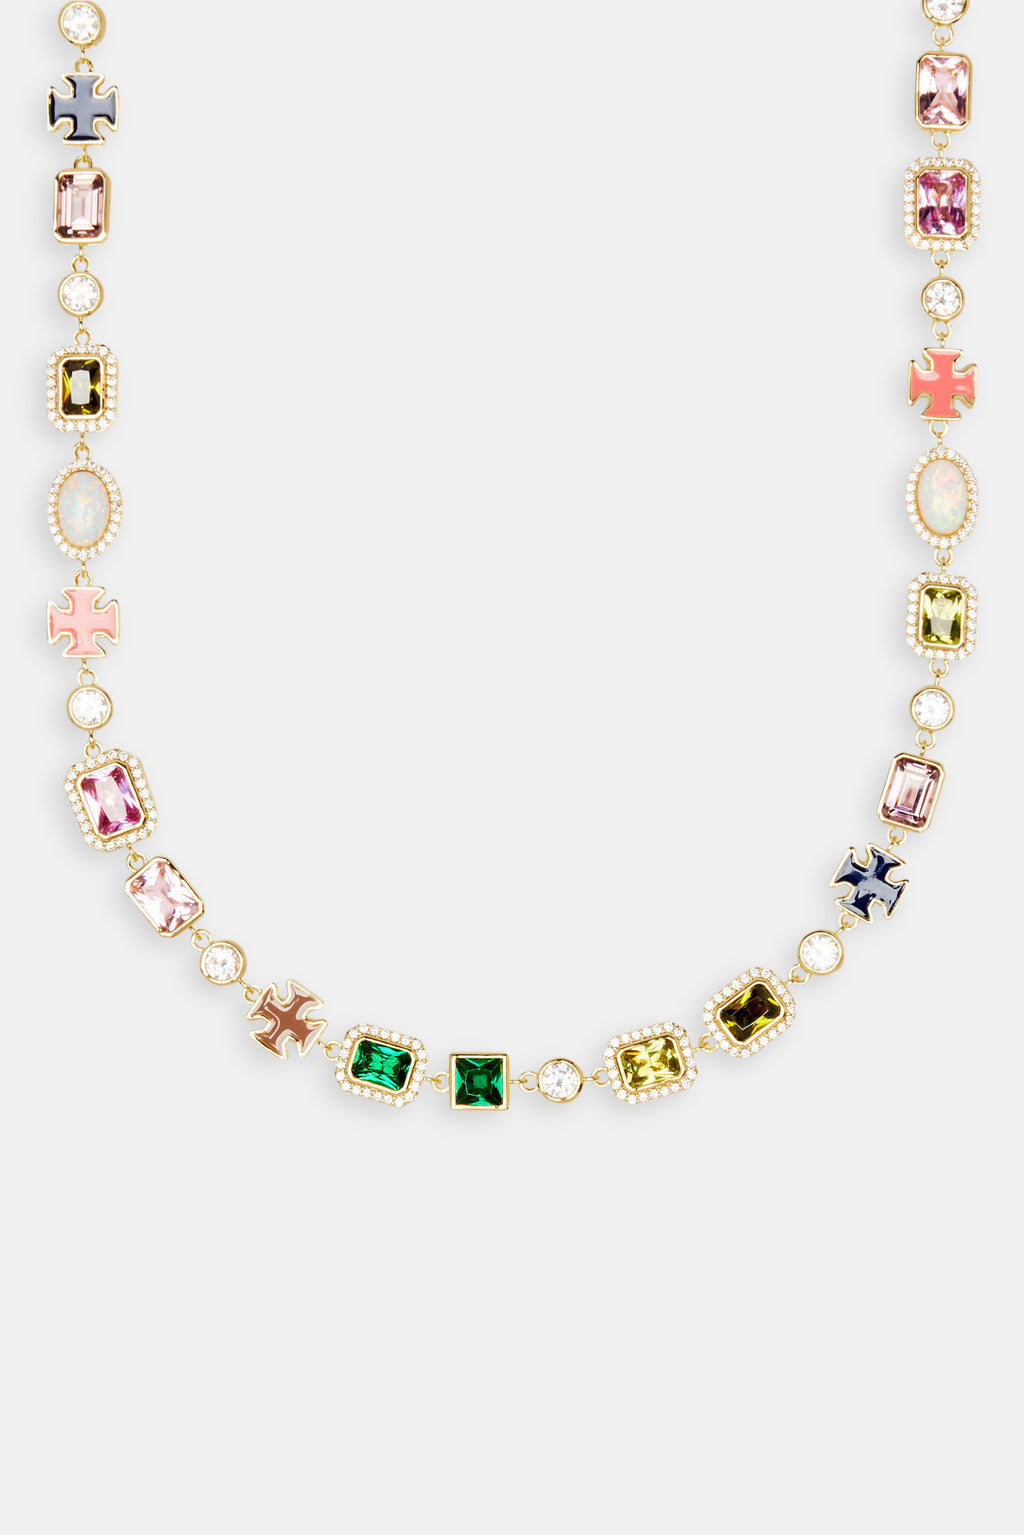 Atiena - Rectangle Lab Created Gemstone Necklace With Crystals - KAMARIA